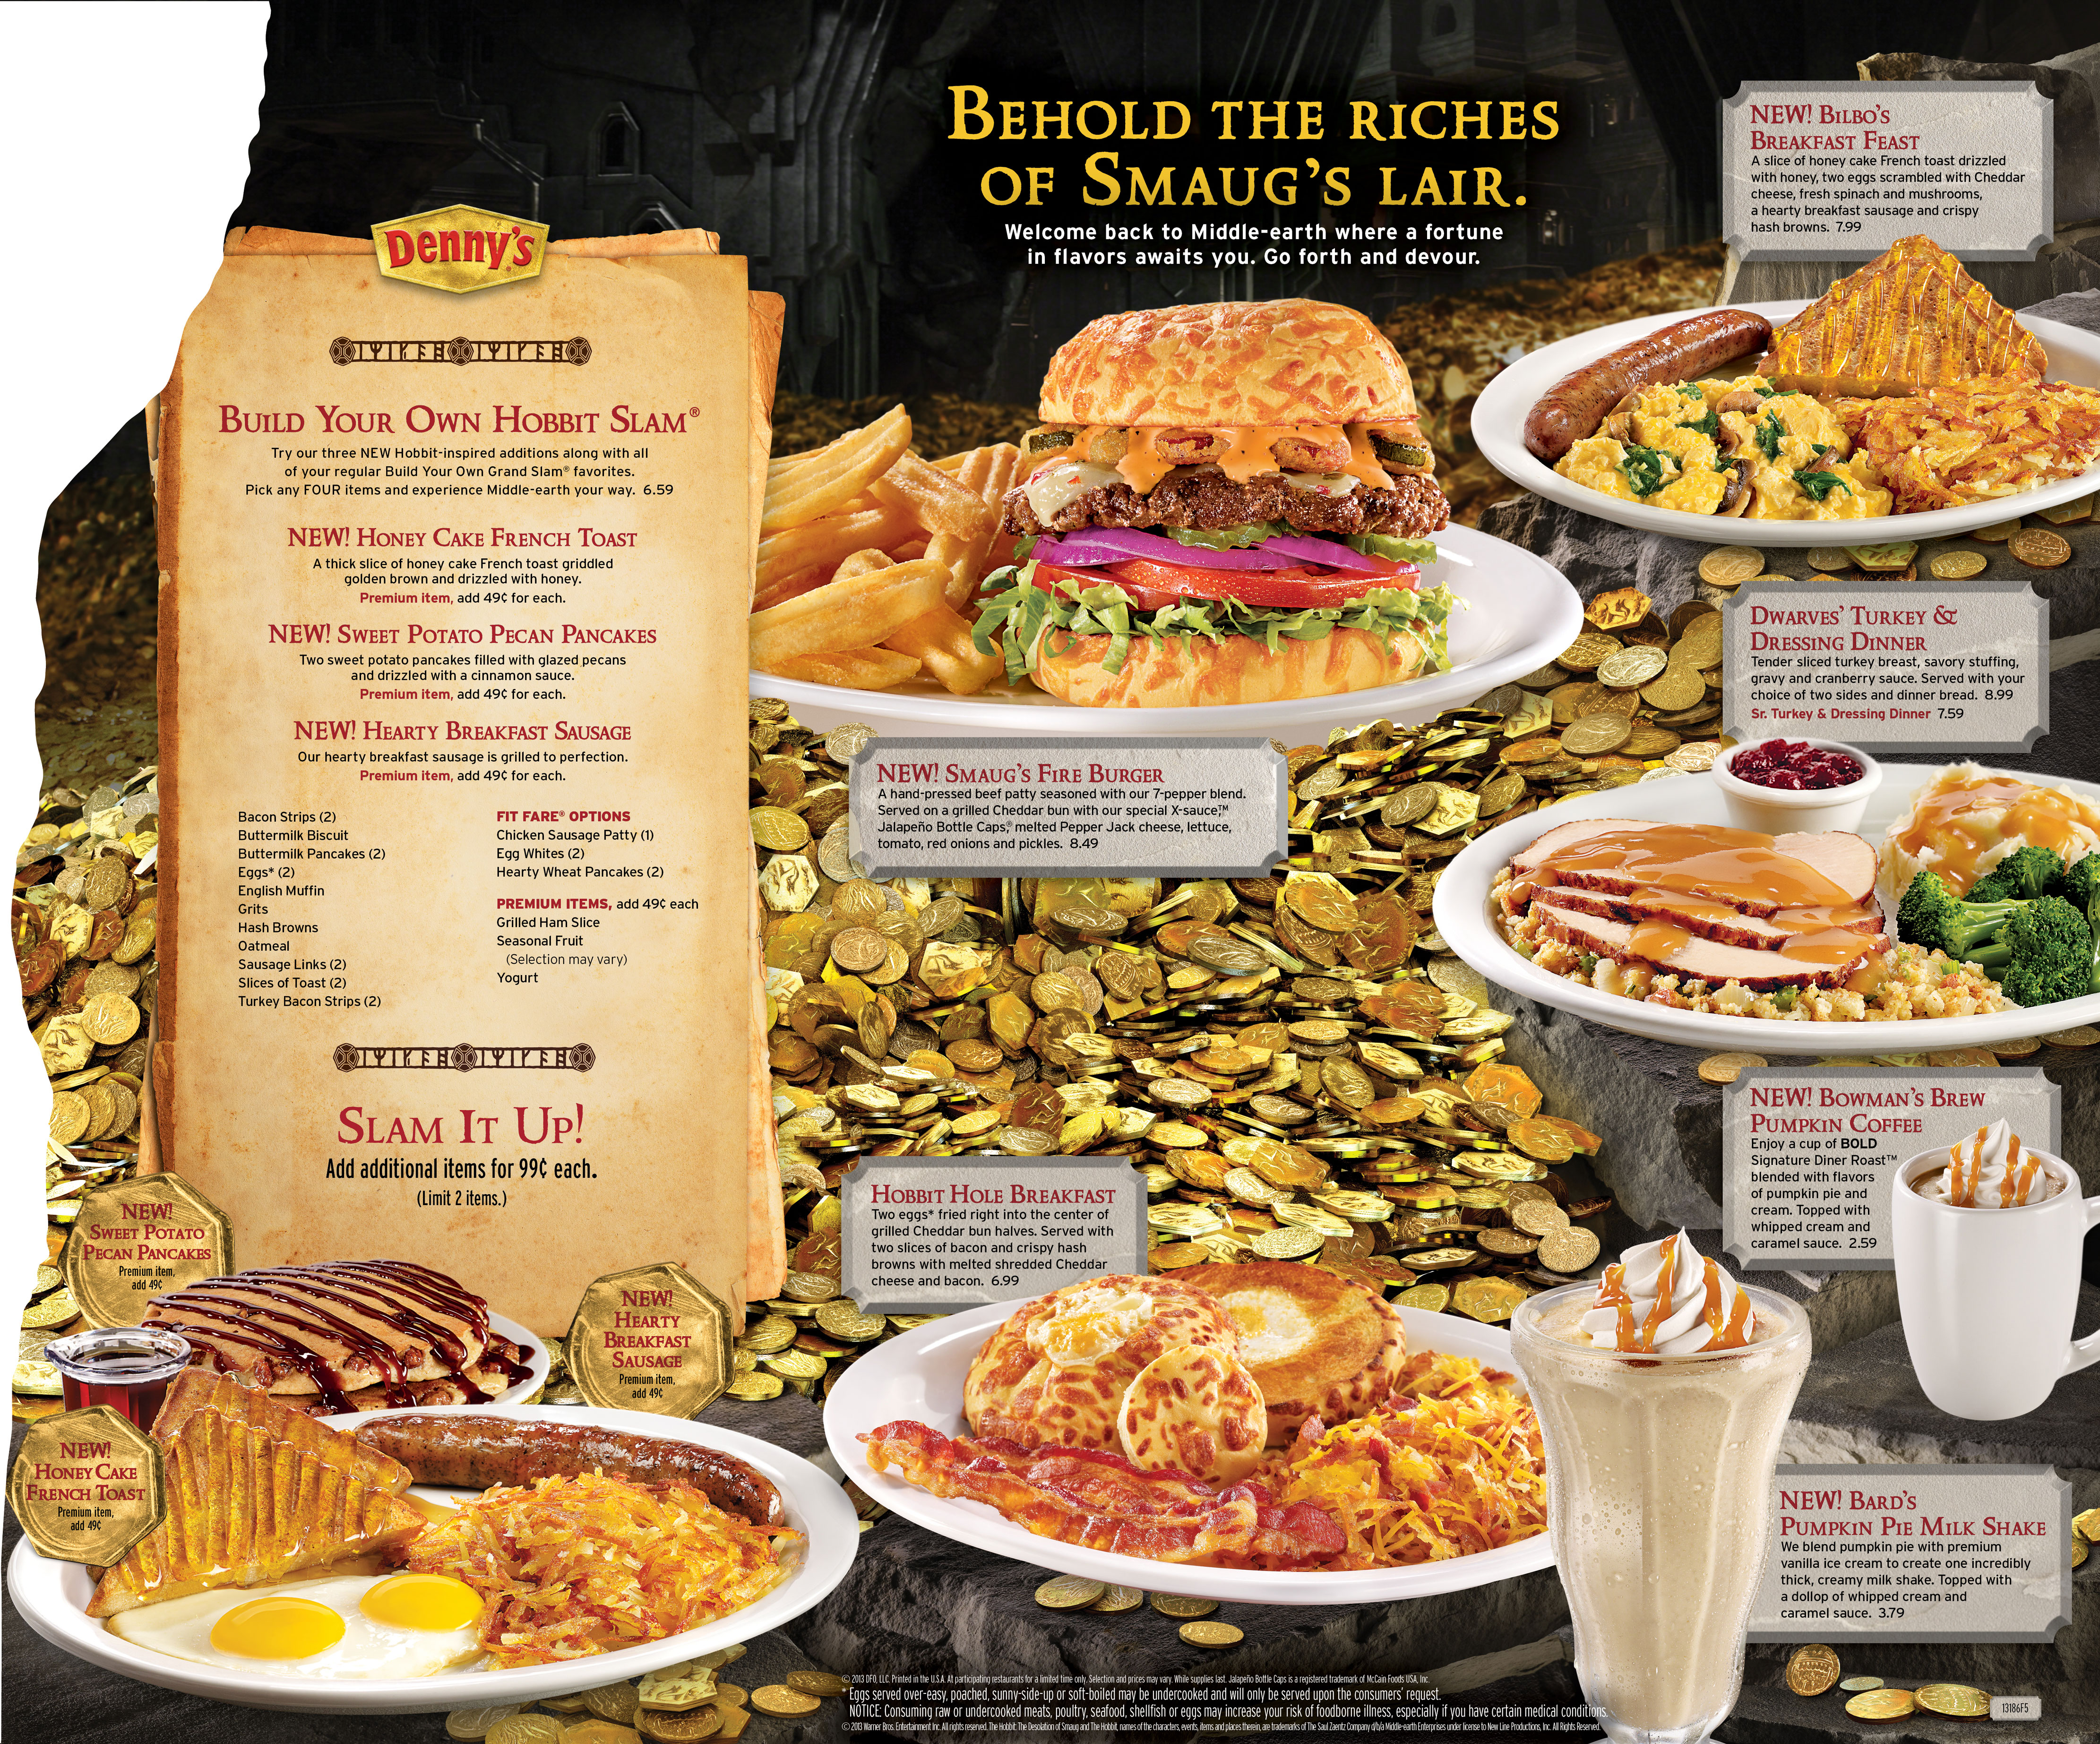 Denny’s new Hobbit menu available from today! Lord of the Rings on